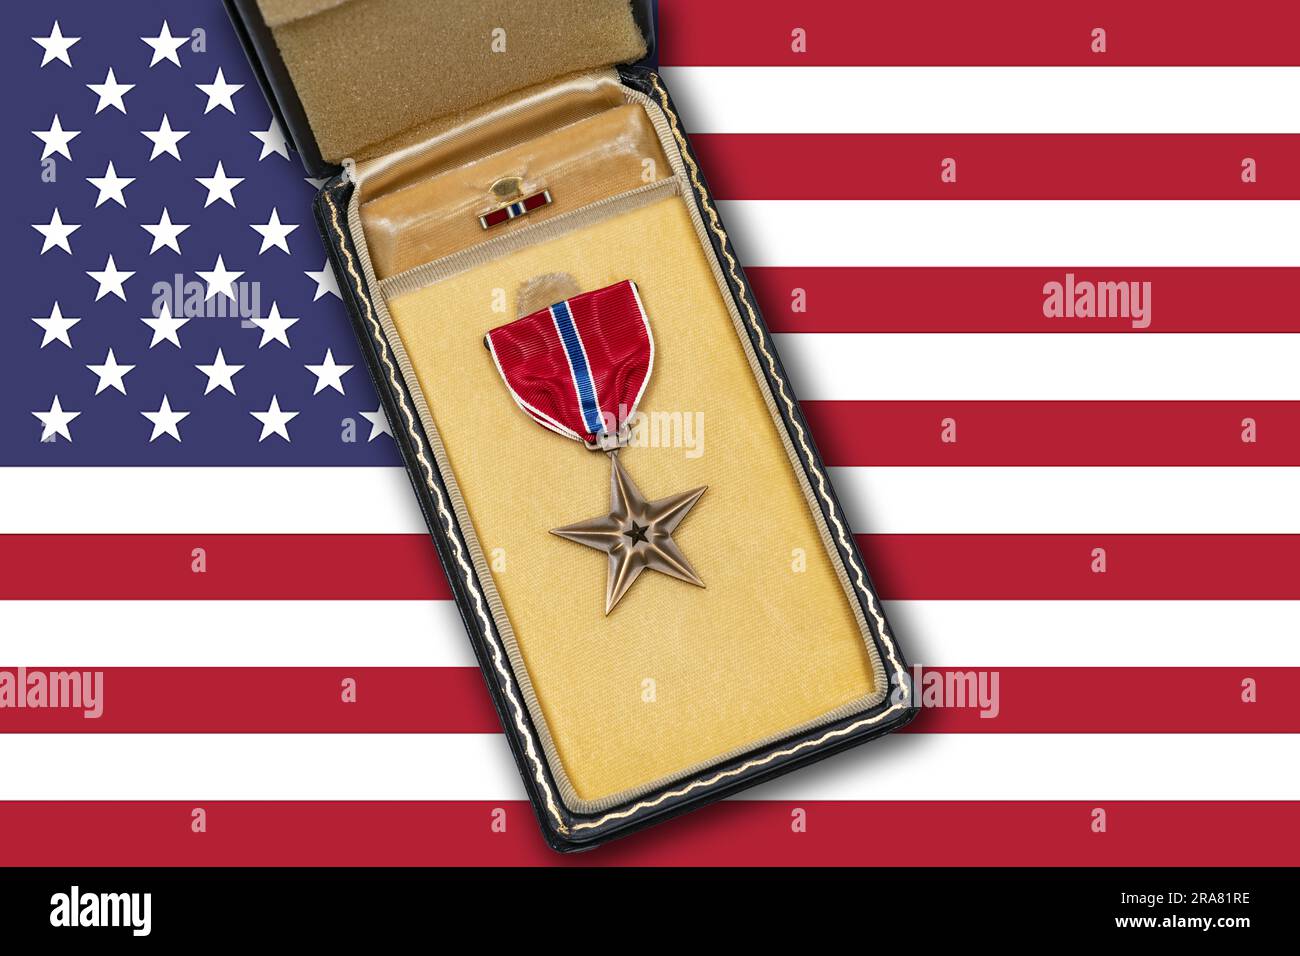 US Air Force Bronze Star medal lying on table with American flag Stock Photo